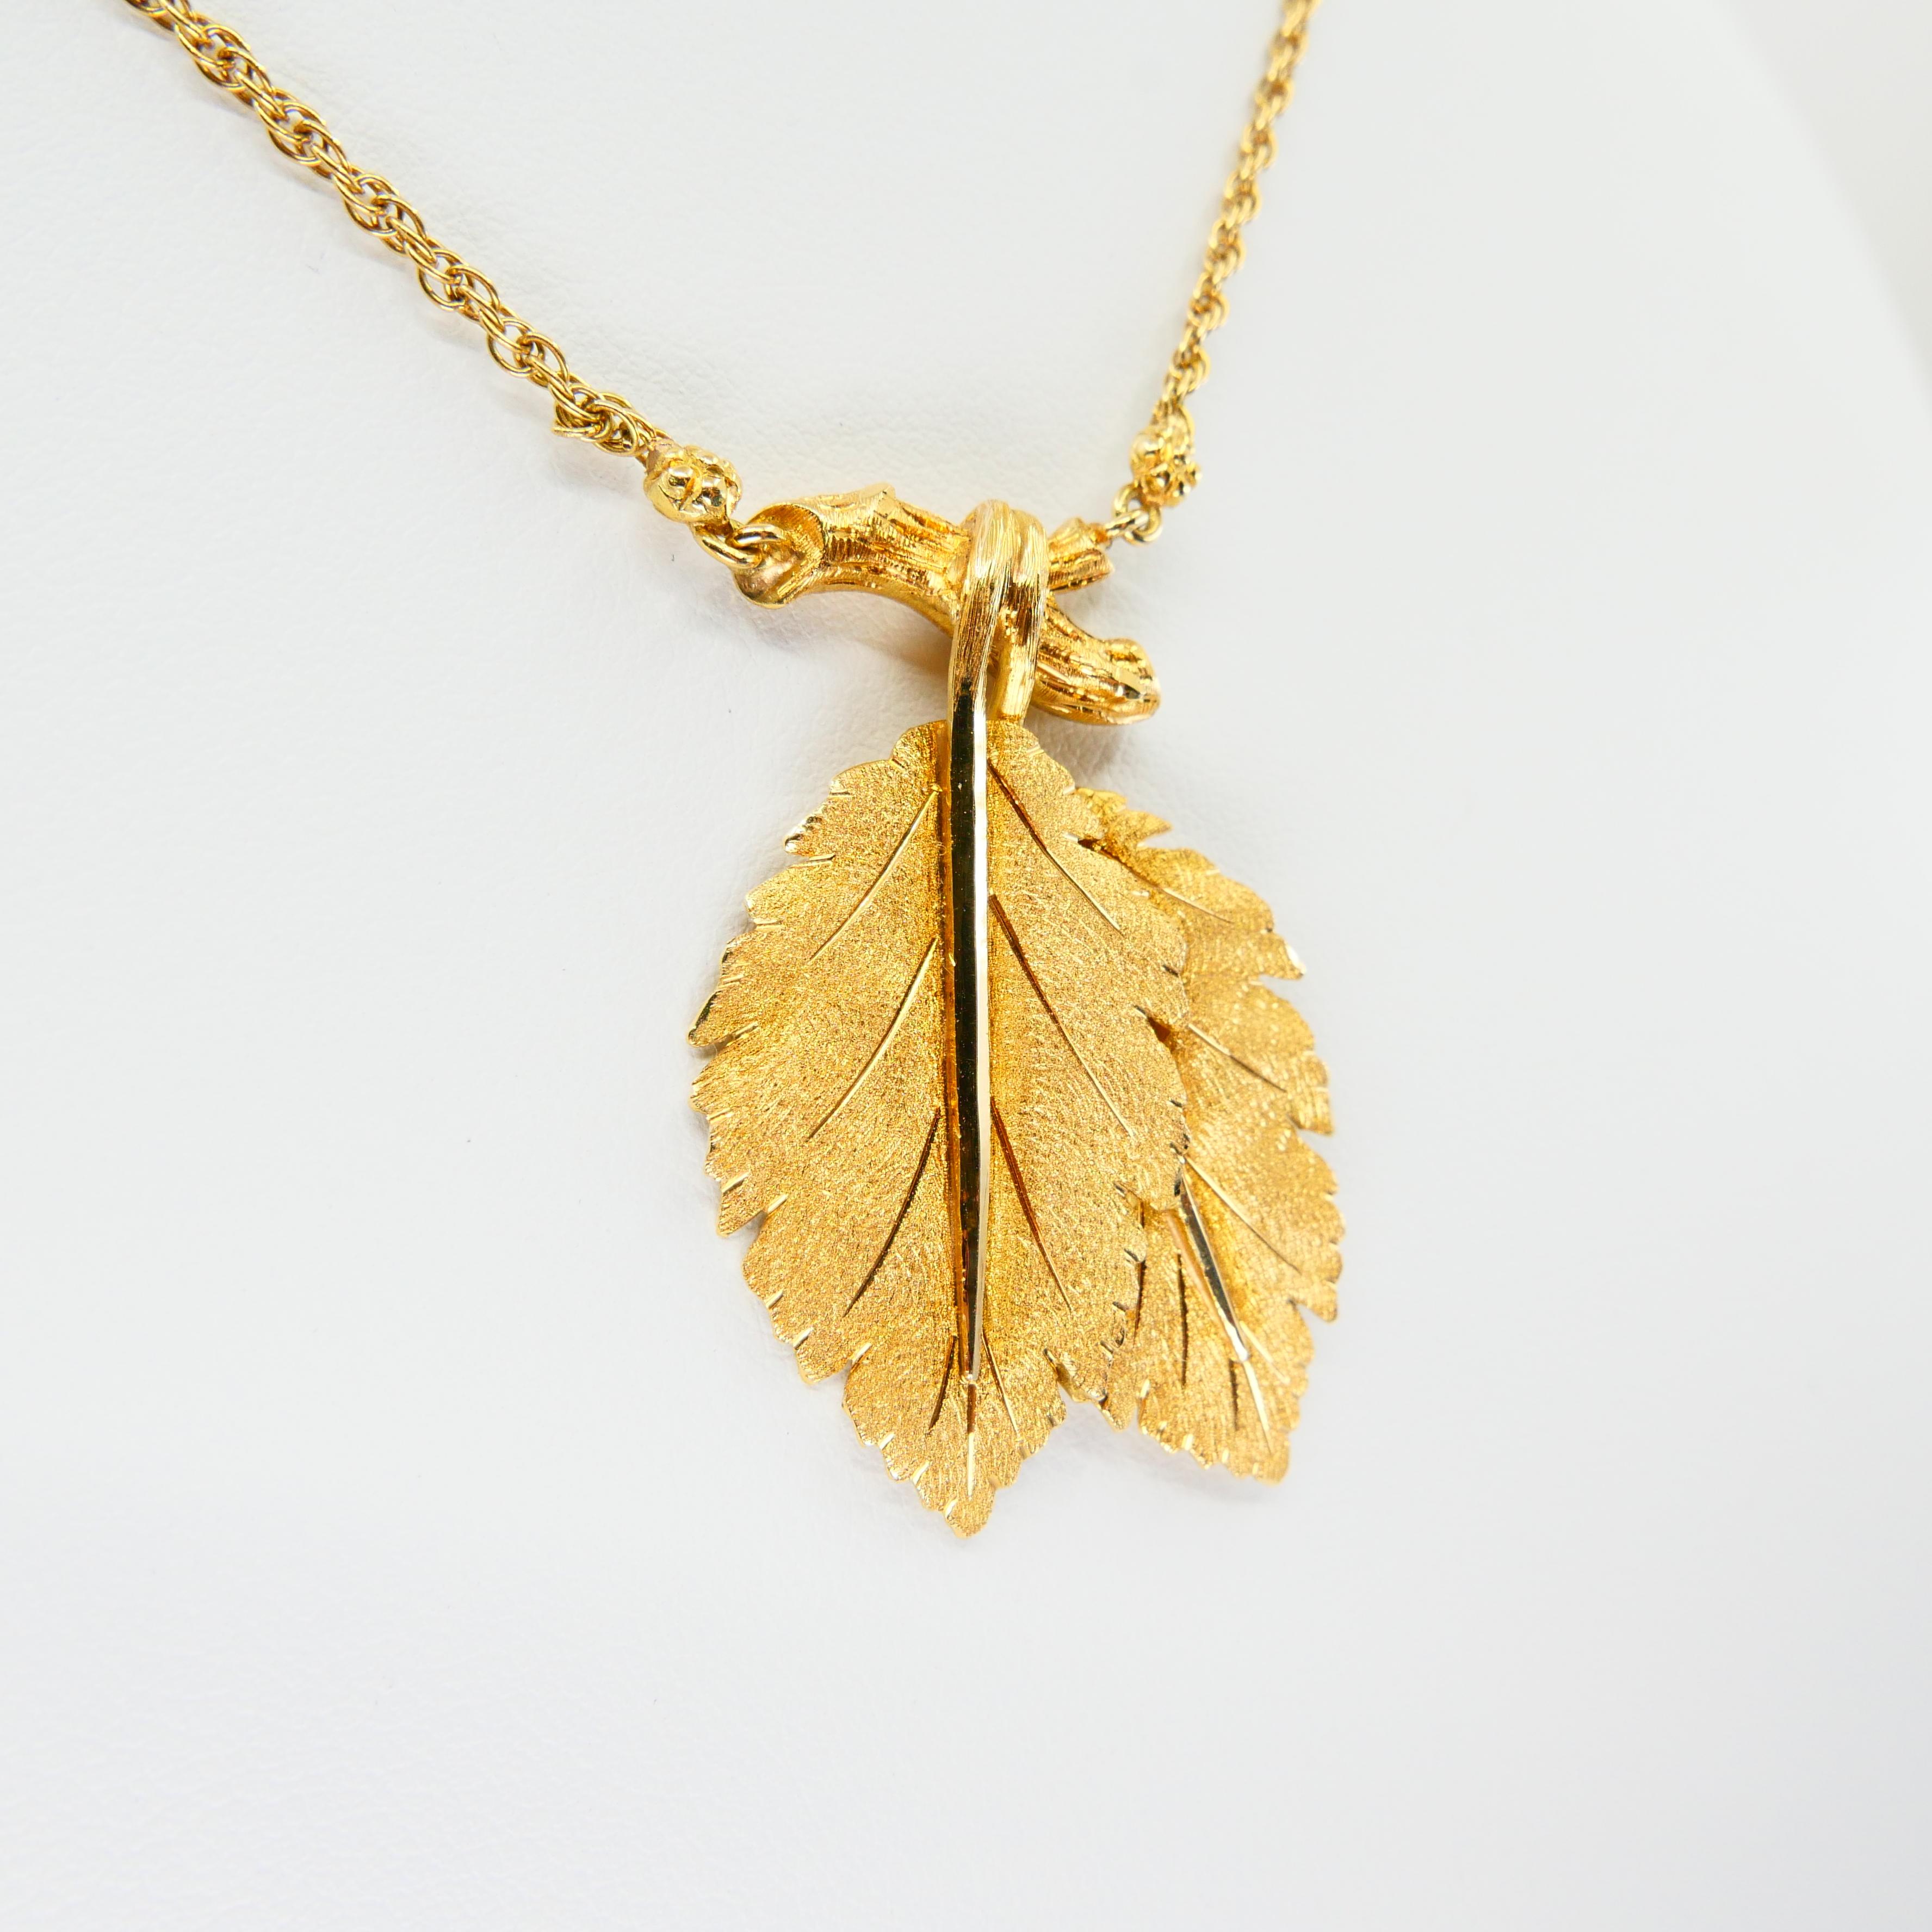 Buccellati, Federico 18K Yellow Gold Leaves and Twigs Pendant Drop Necklace  8